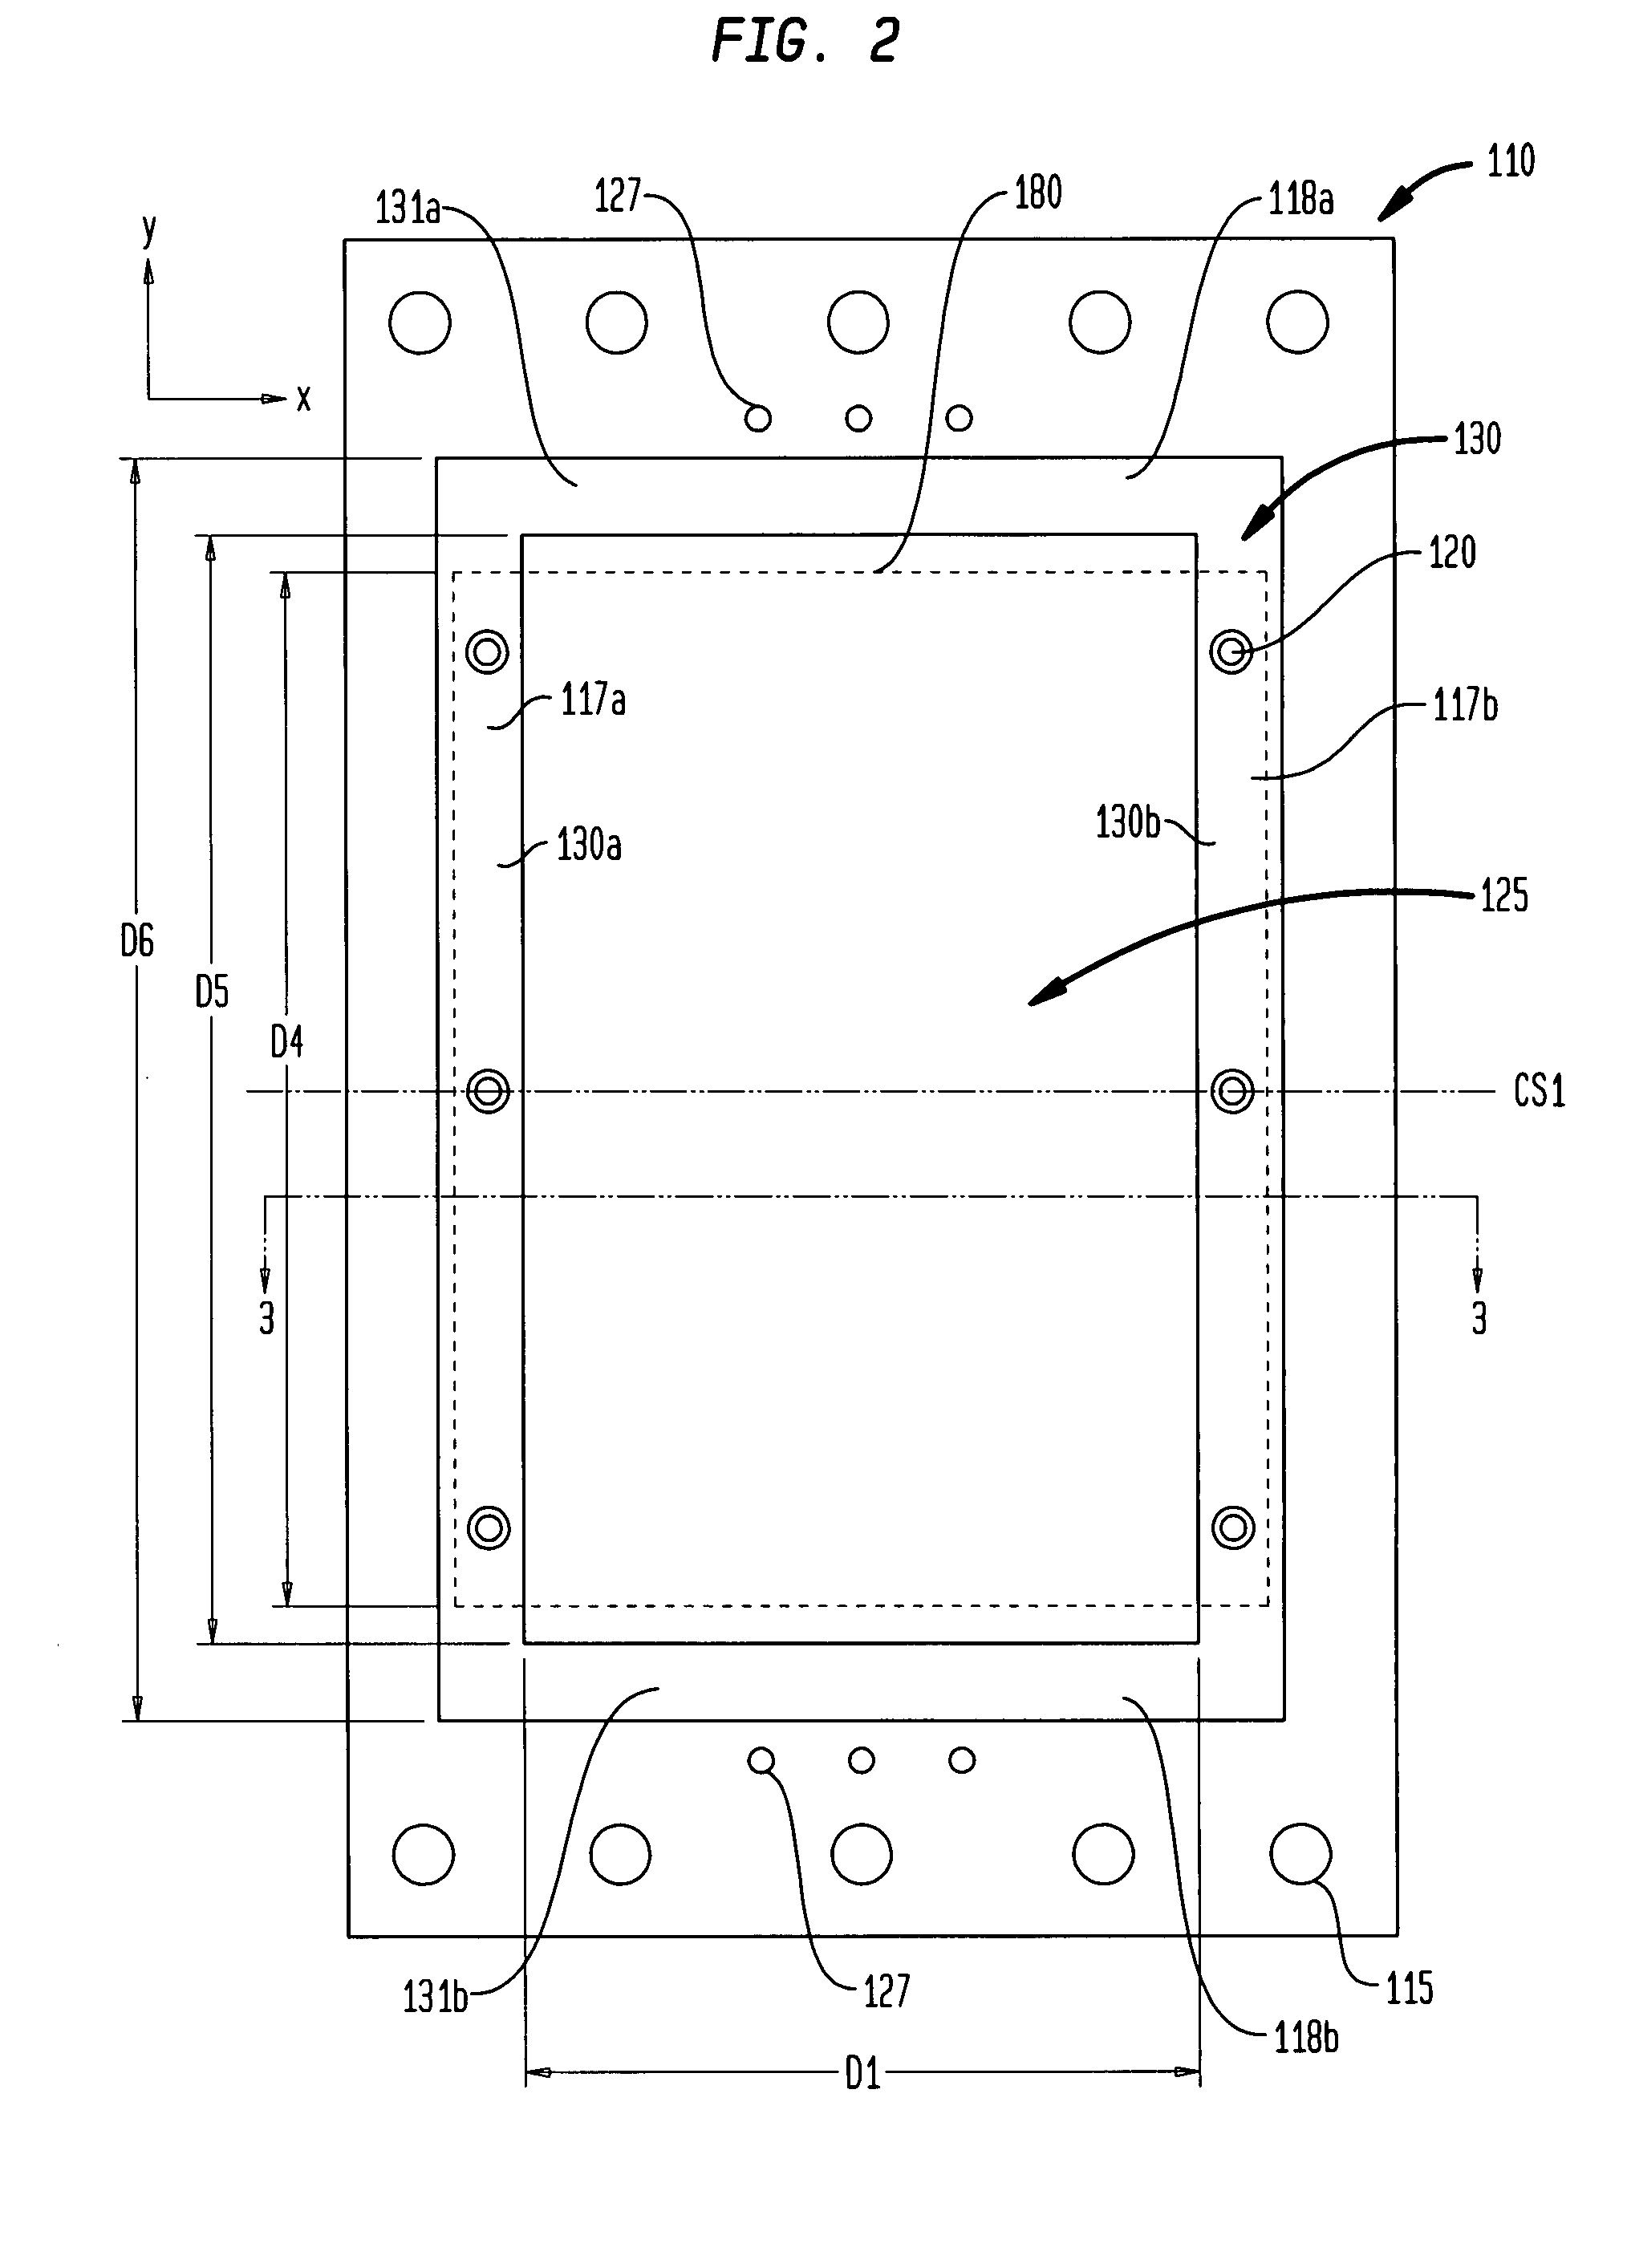 Alignment and cutting of microelectronic substrates